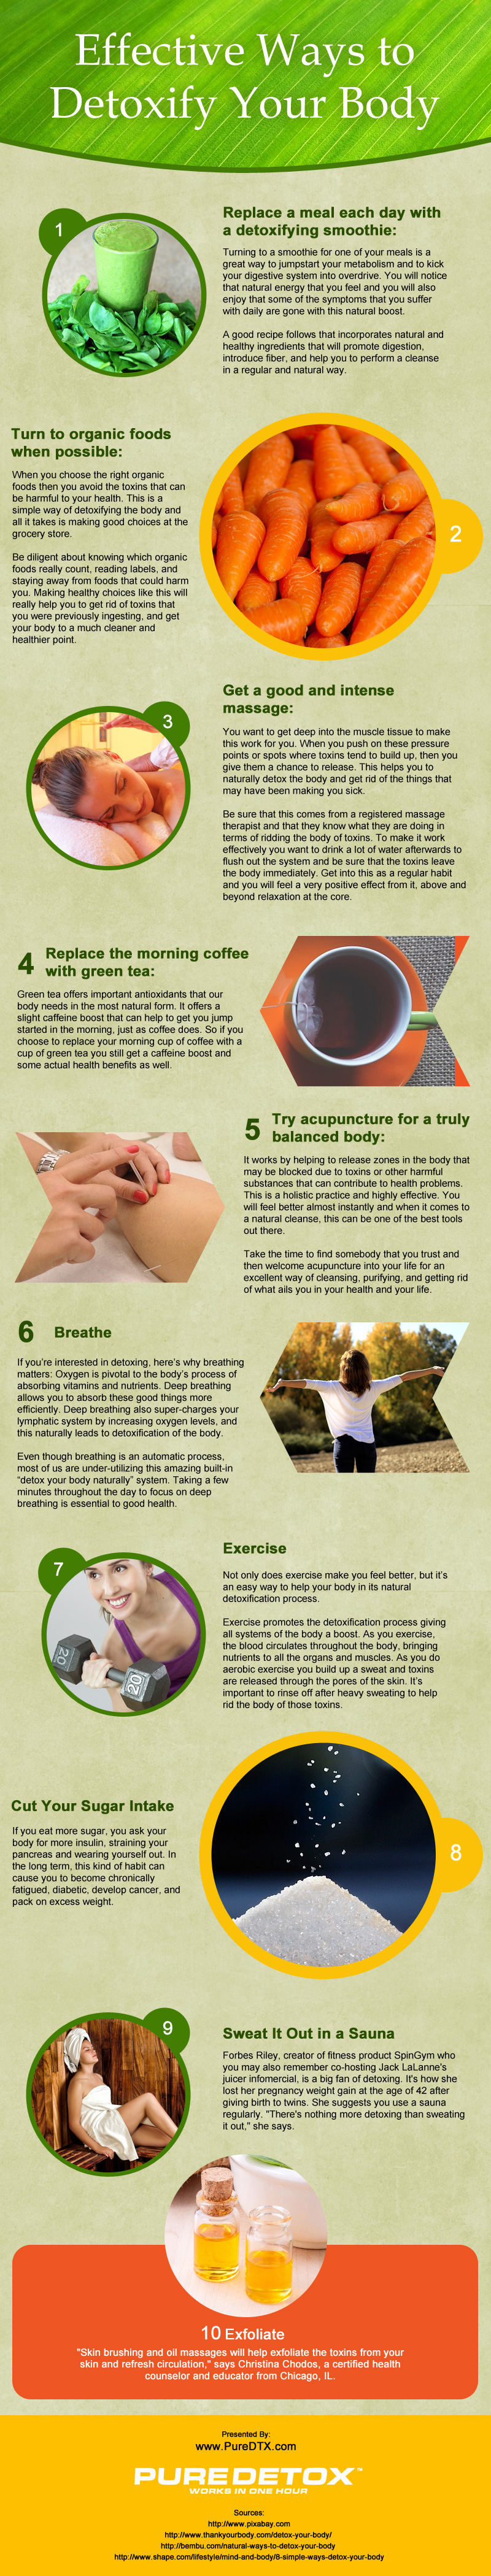 Effective Ways to Detoxify Your Body [infographic]